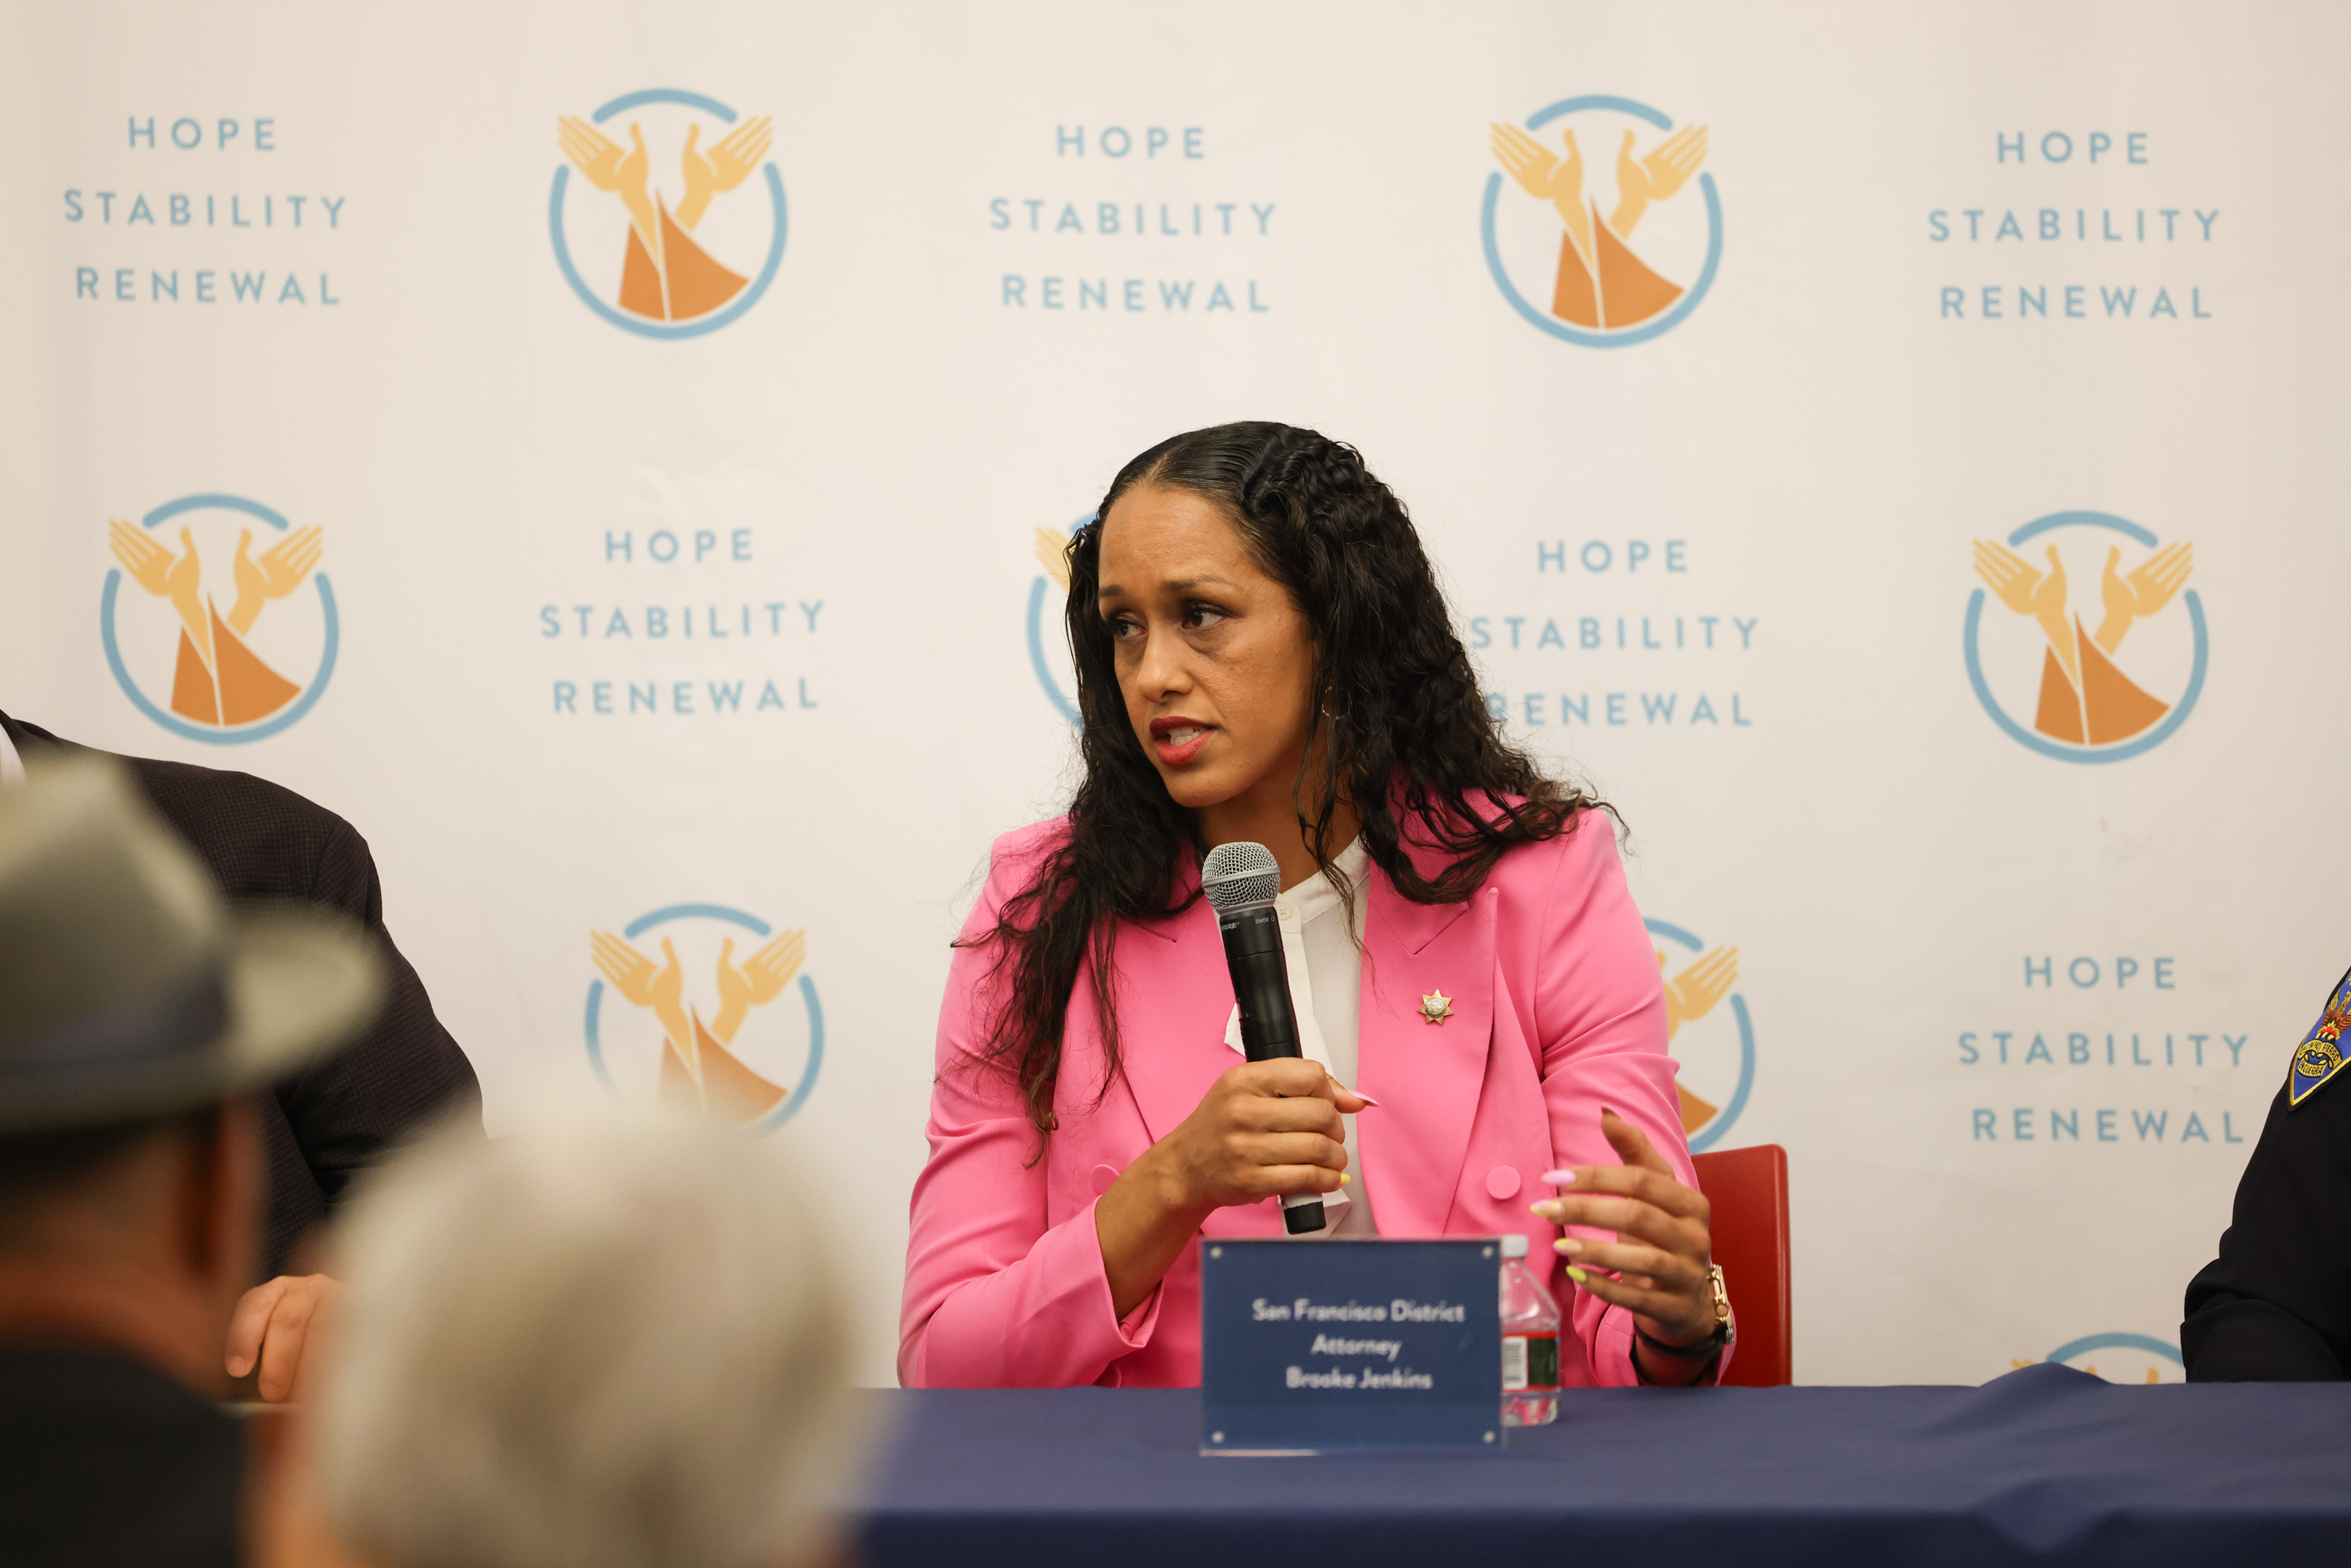 A woman in a pink jacket speaks into a microphone at a table with a backdrop displaying &quot;Hope Stability Renewal&quot; logos.